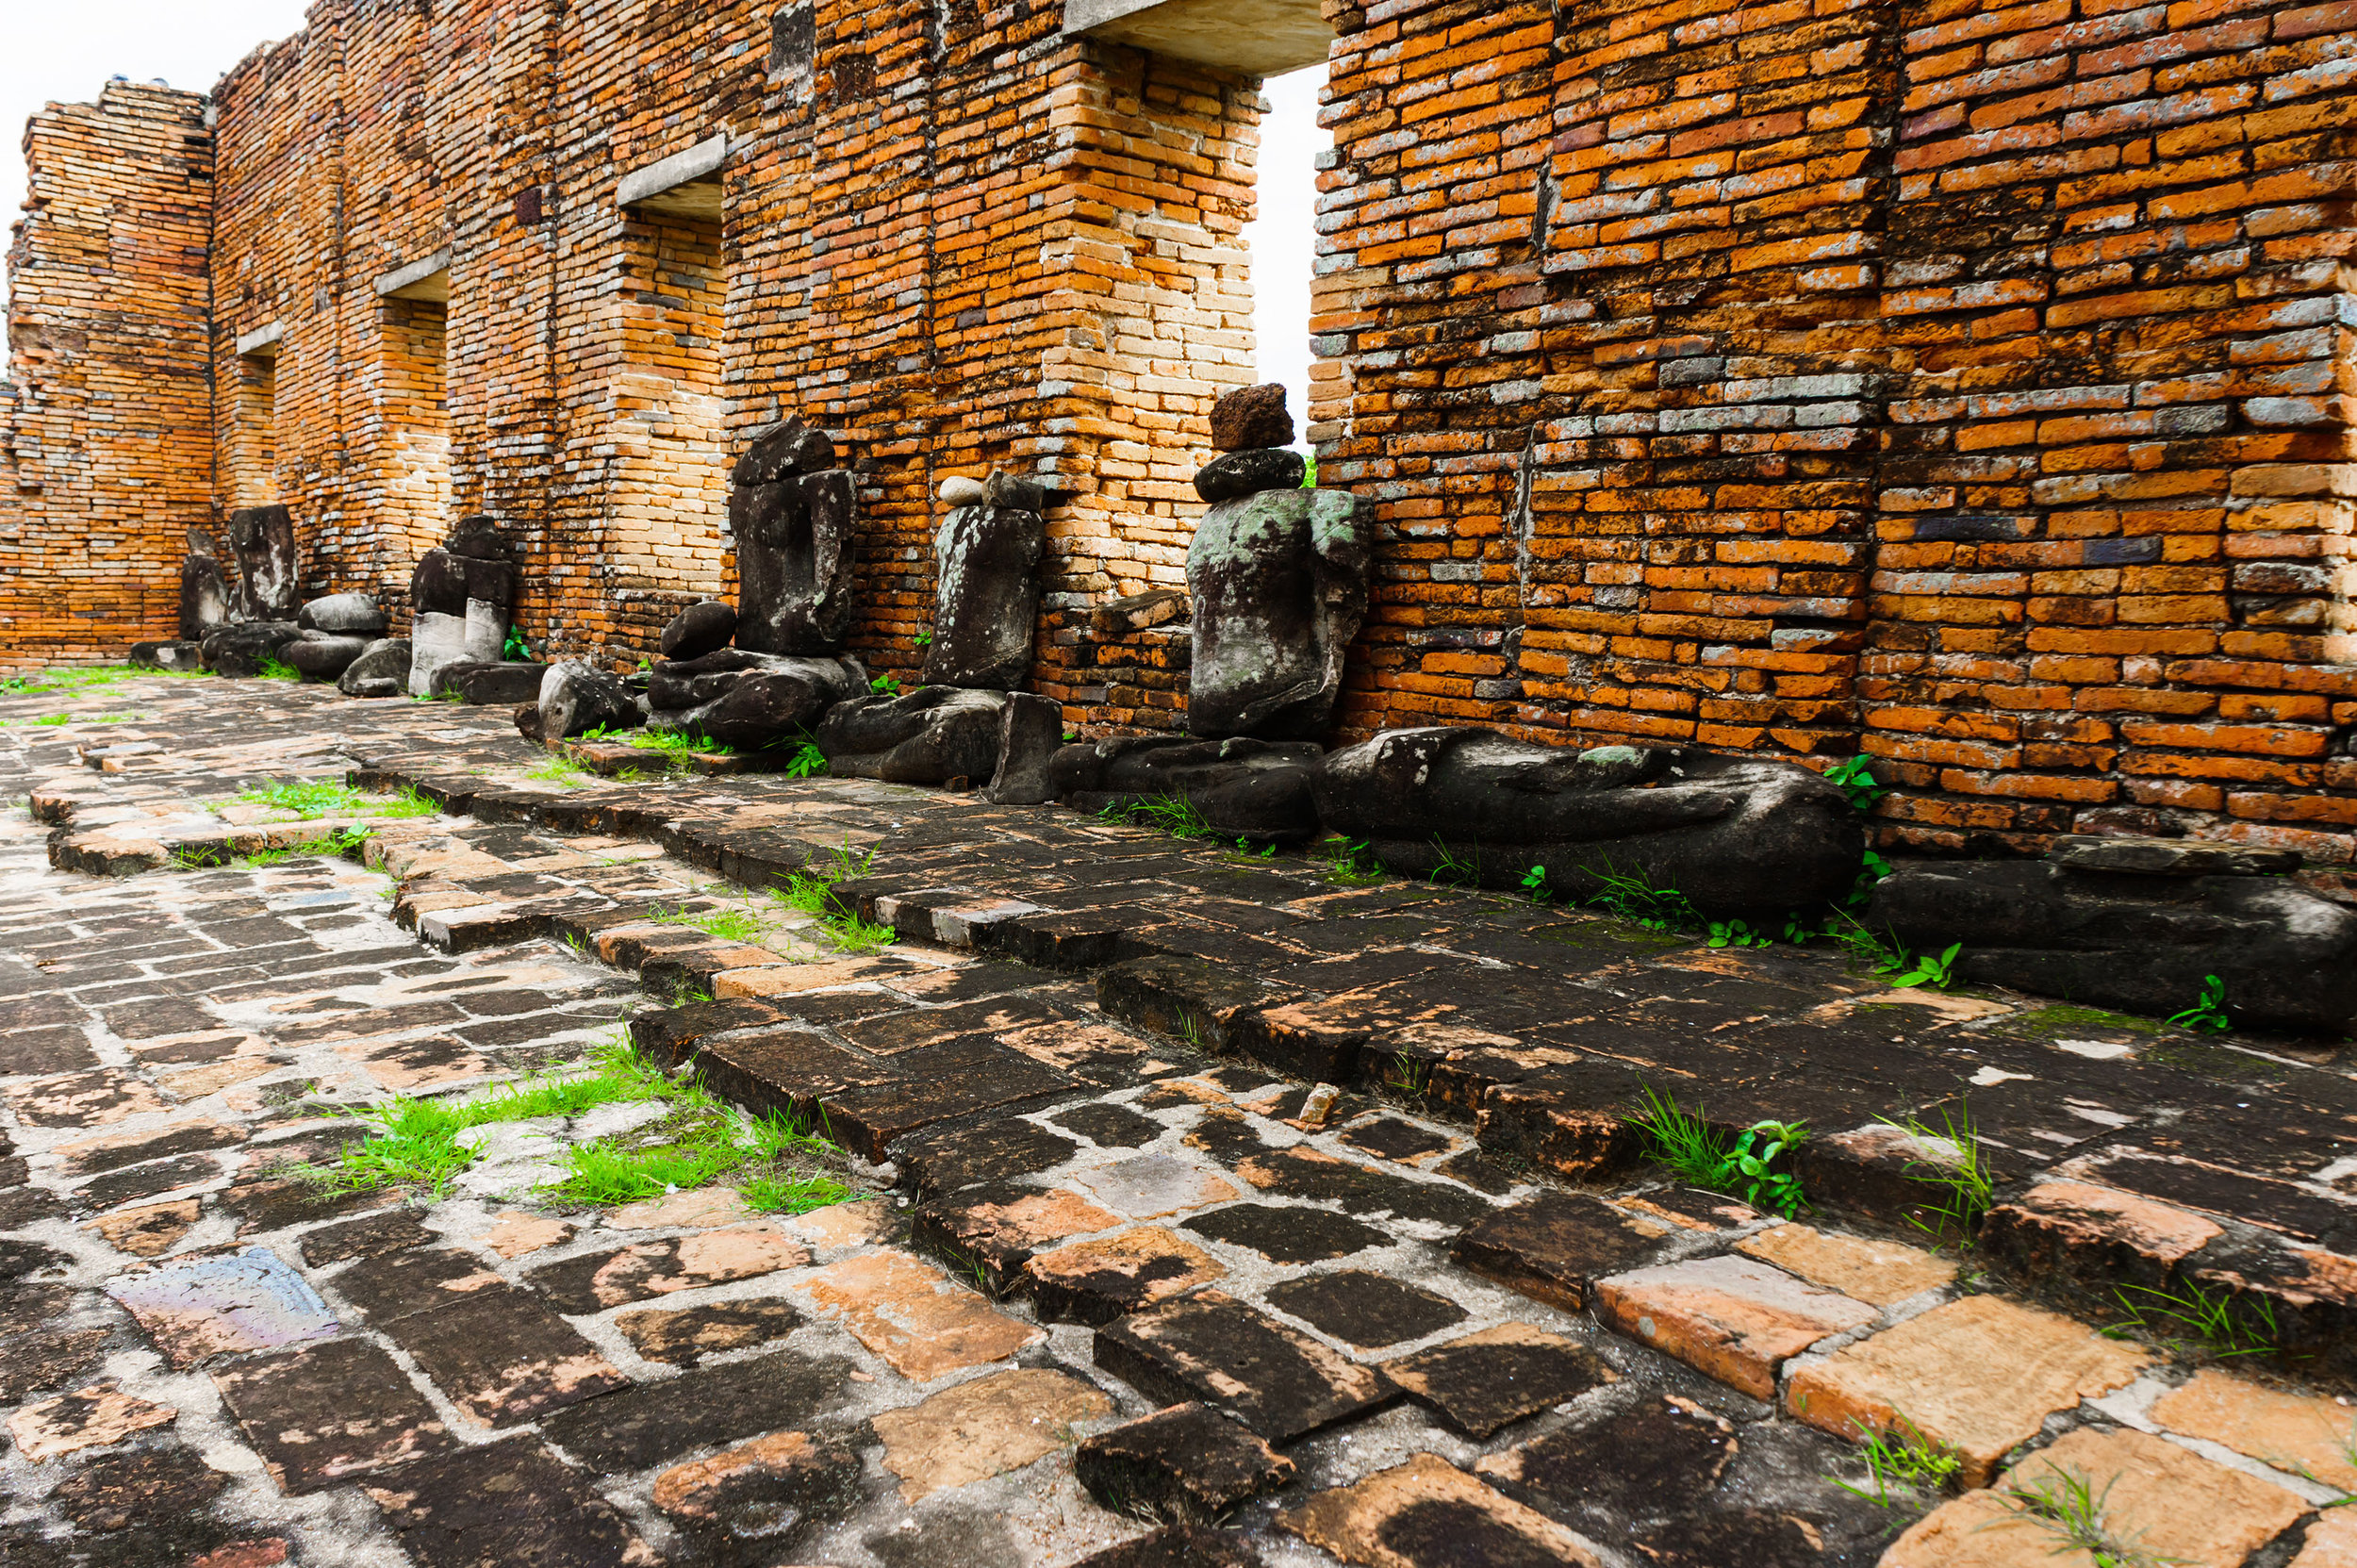 Ancient-Buddha-statue-articulate-are-red-brick-wall-in-Ayutthaya,-Thailand.-915613258_3156x2100.jpeg